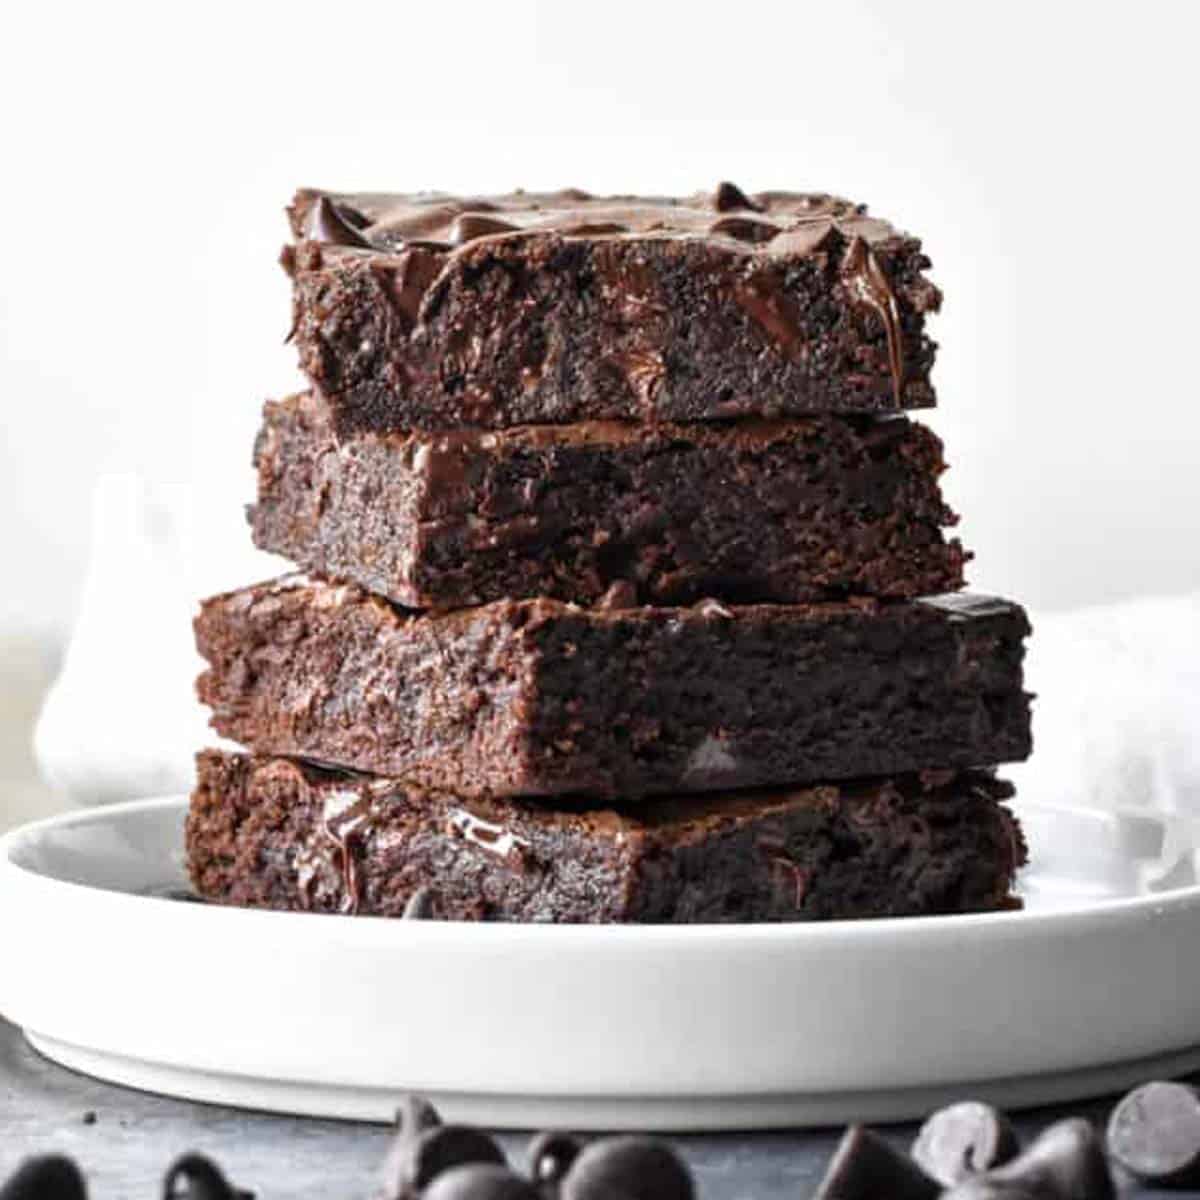 A stack of fudgy brownies with pockets of melted chocolate on a white plate